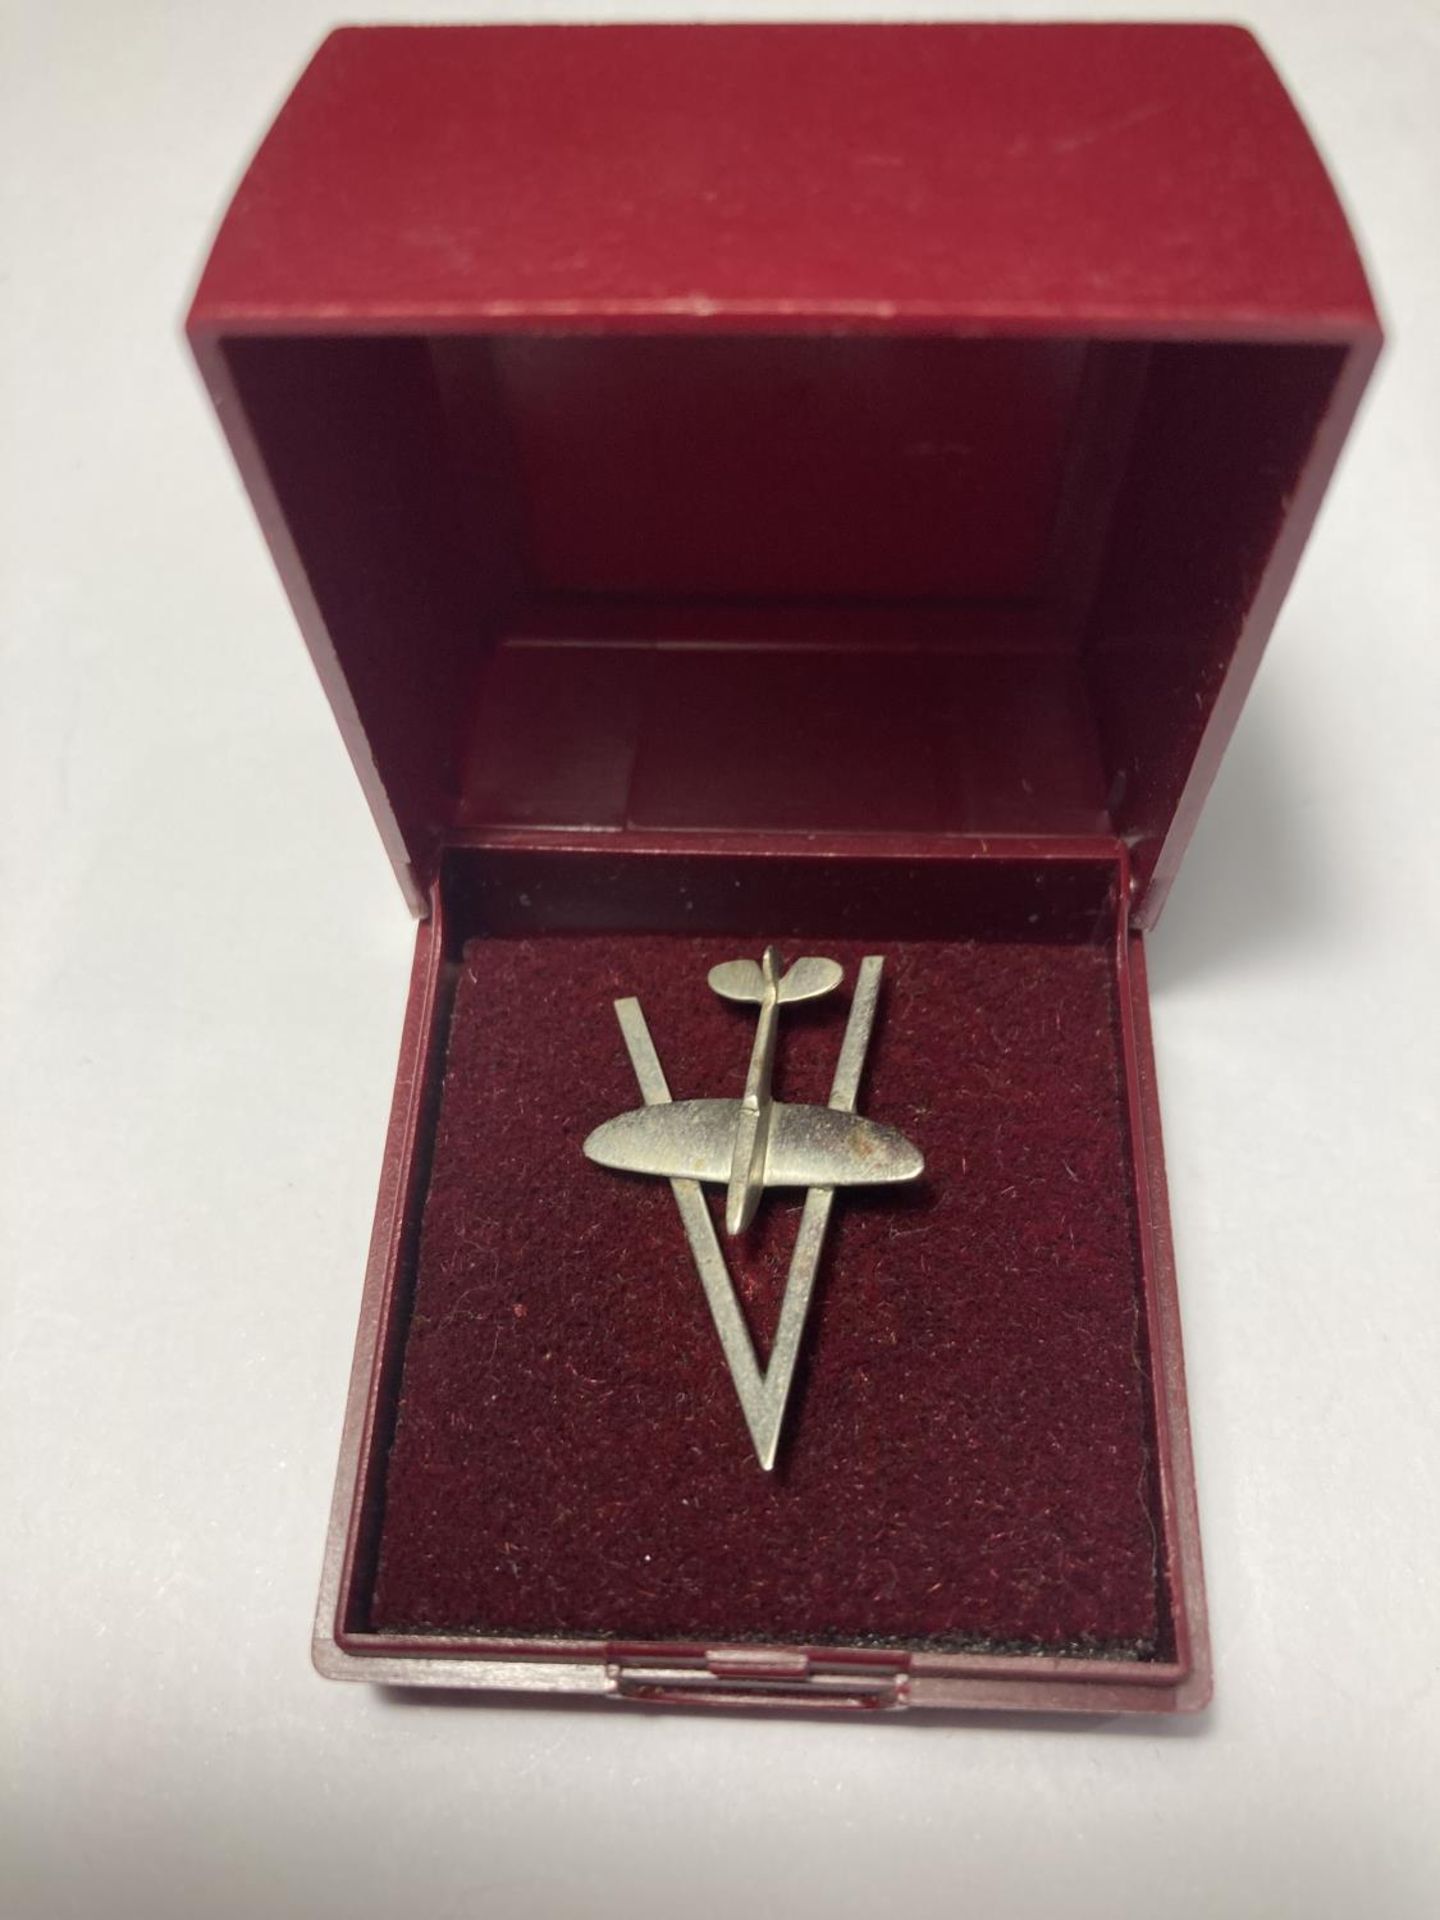 A BOXED SPITFIRE VICTORY V BROOCH